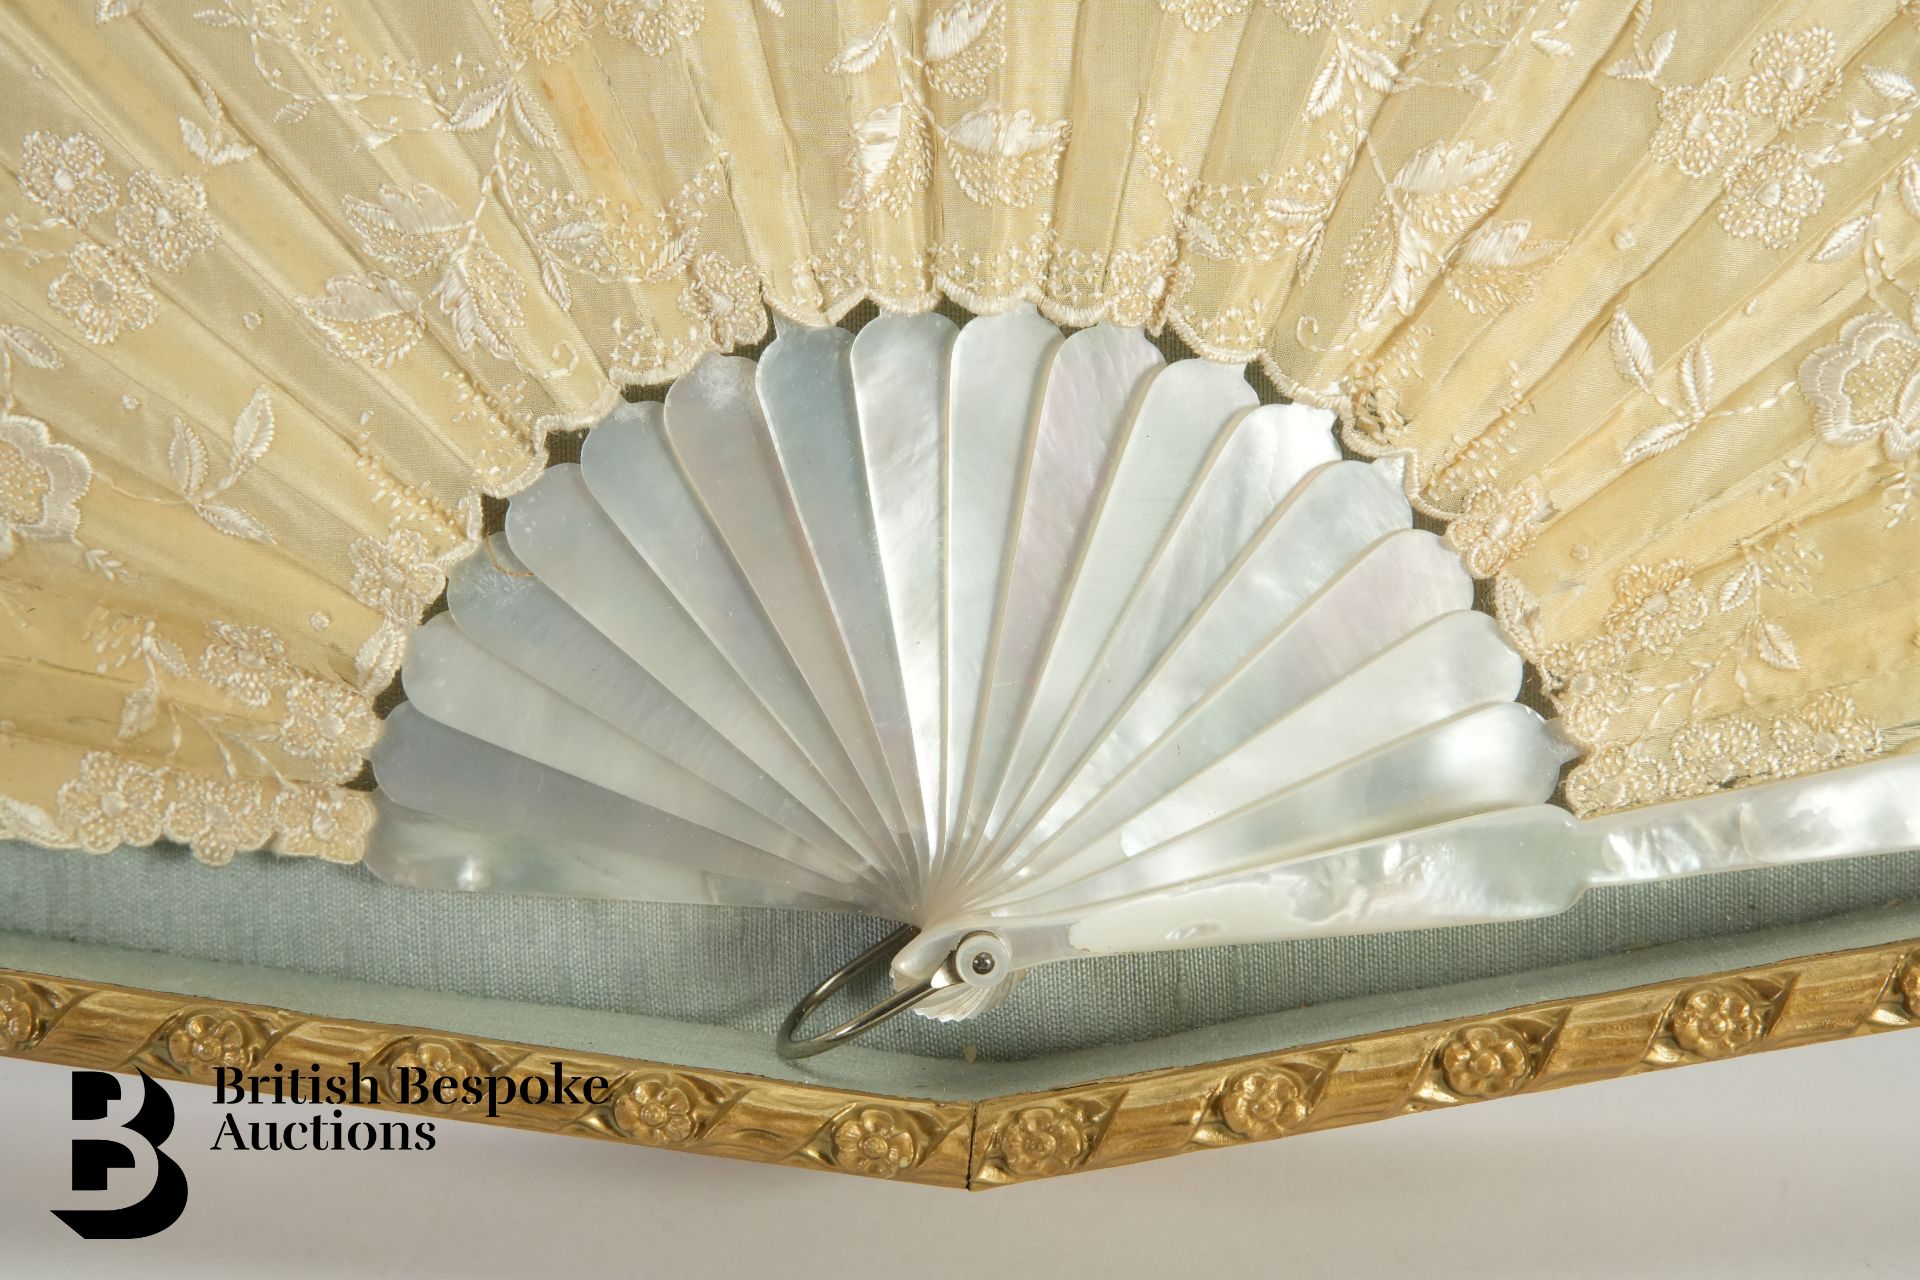 Late 19th Century Silk Embroidered Fan - Image 2 of 5